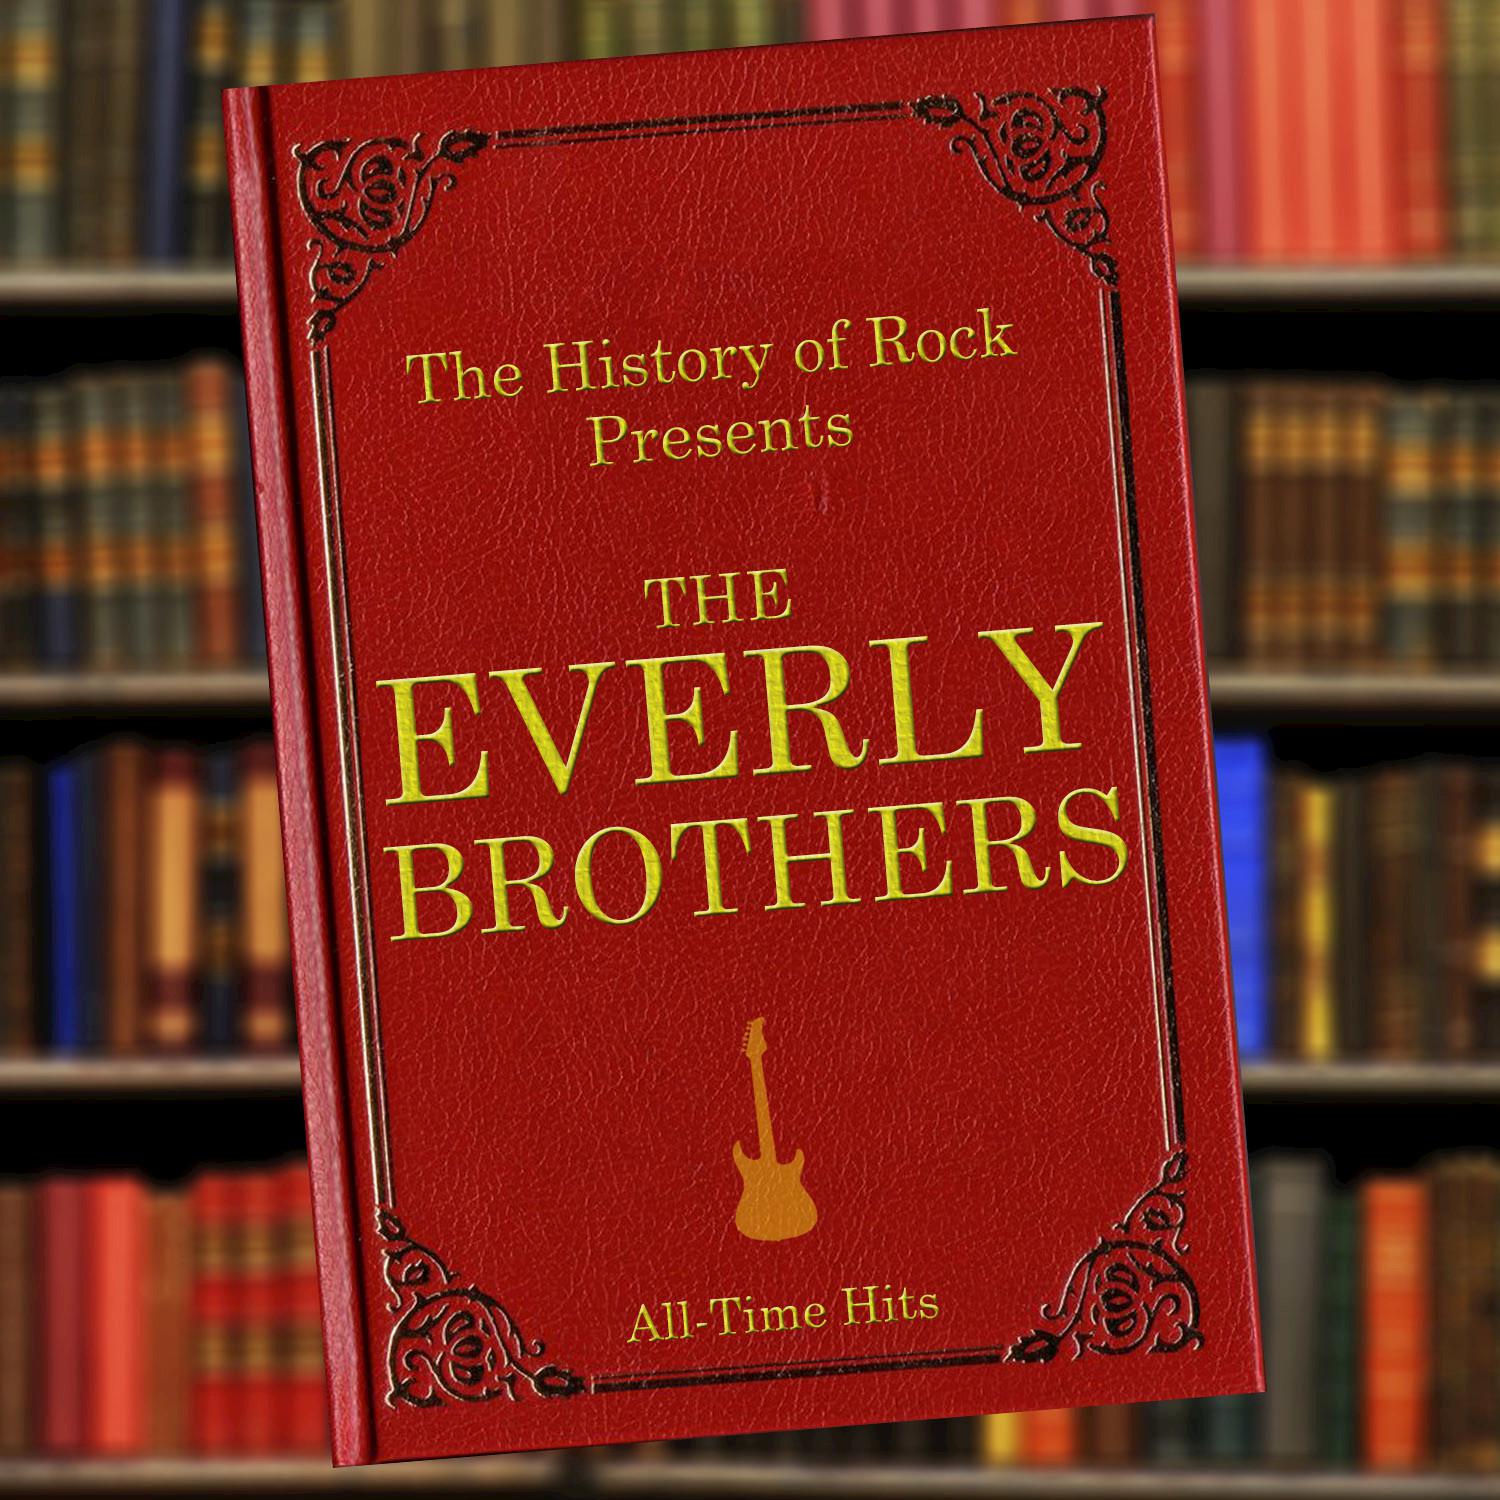 The History of Rock Presents The Everly Brothers